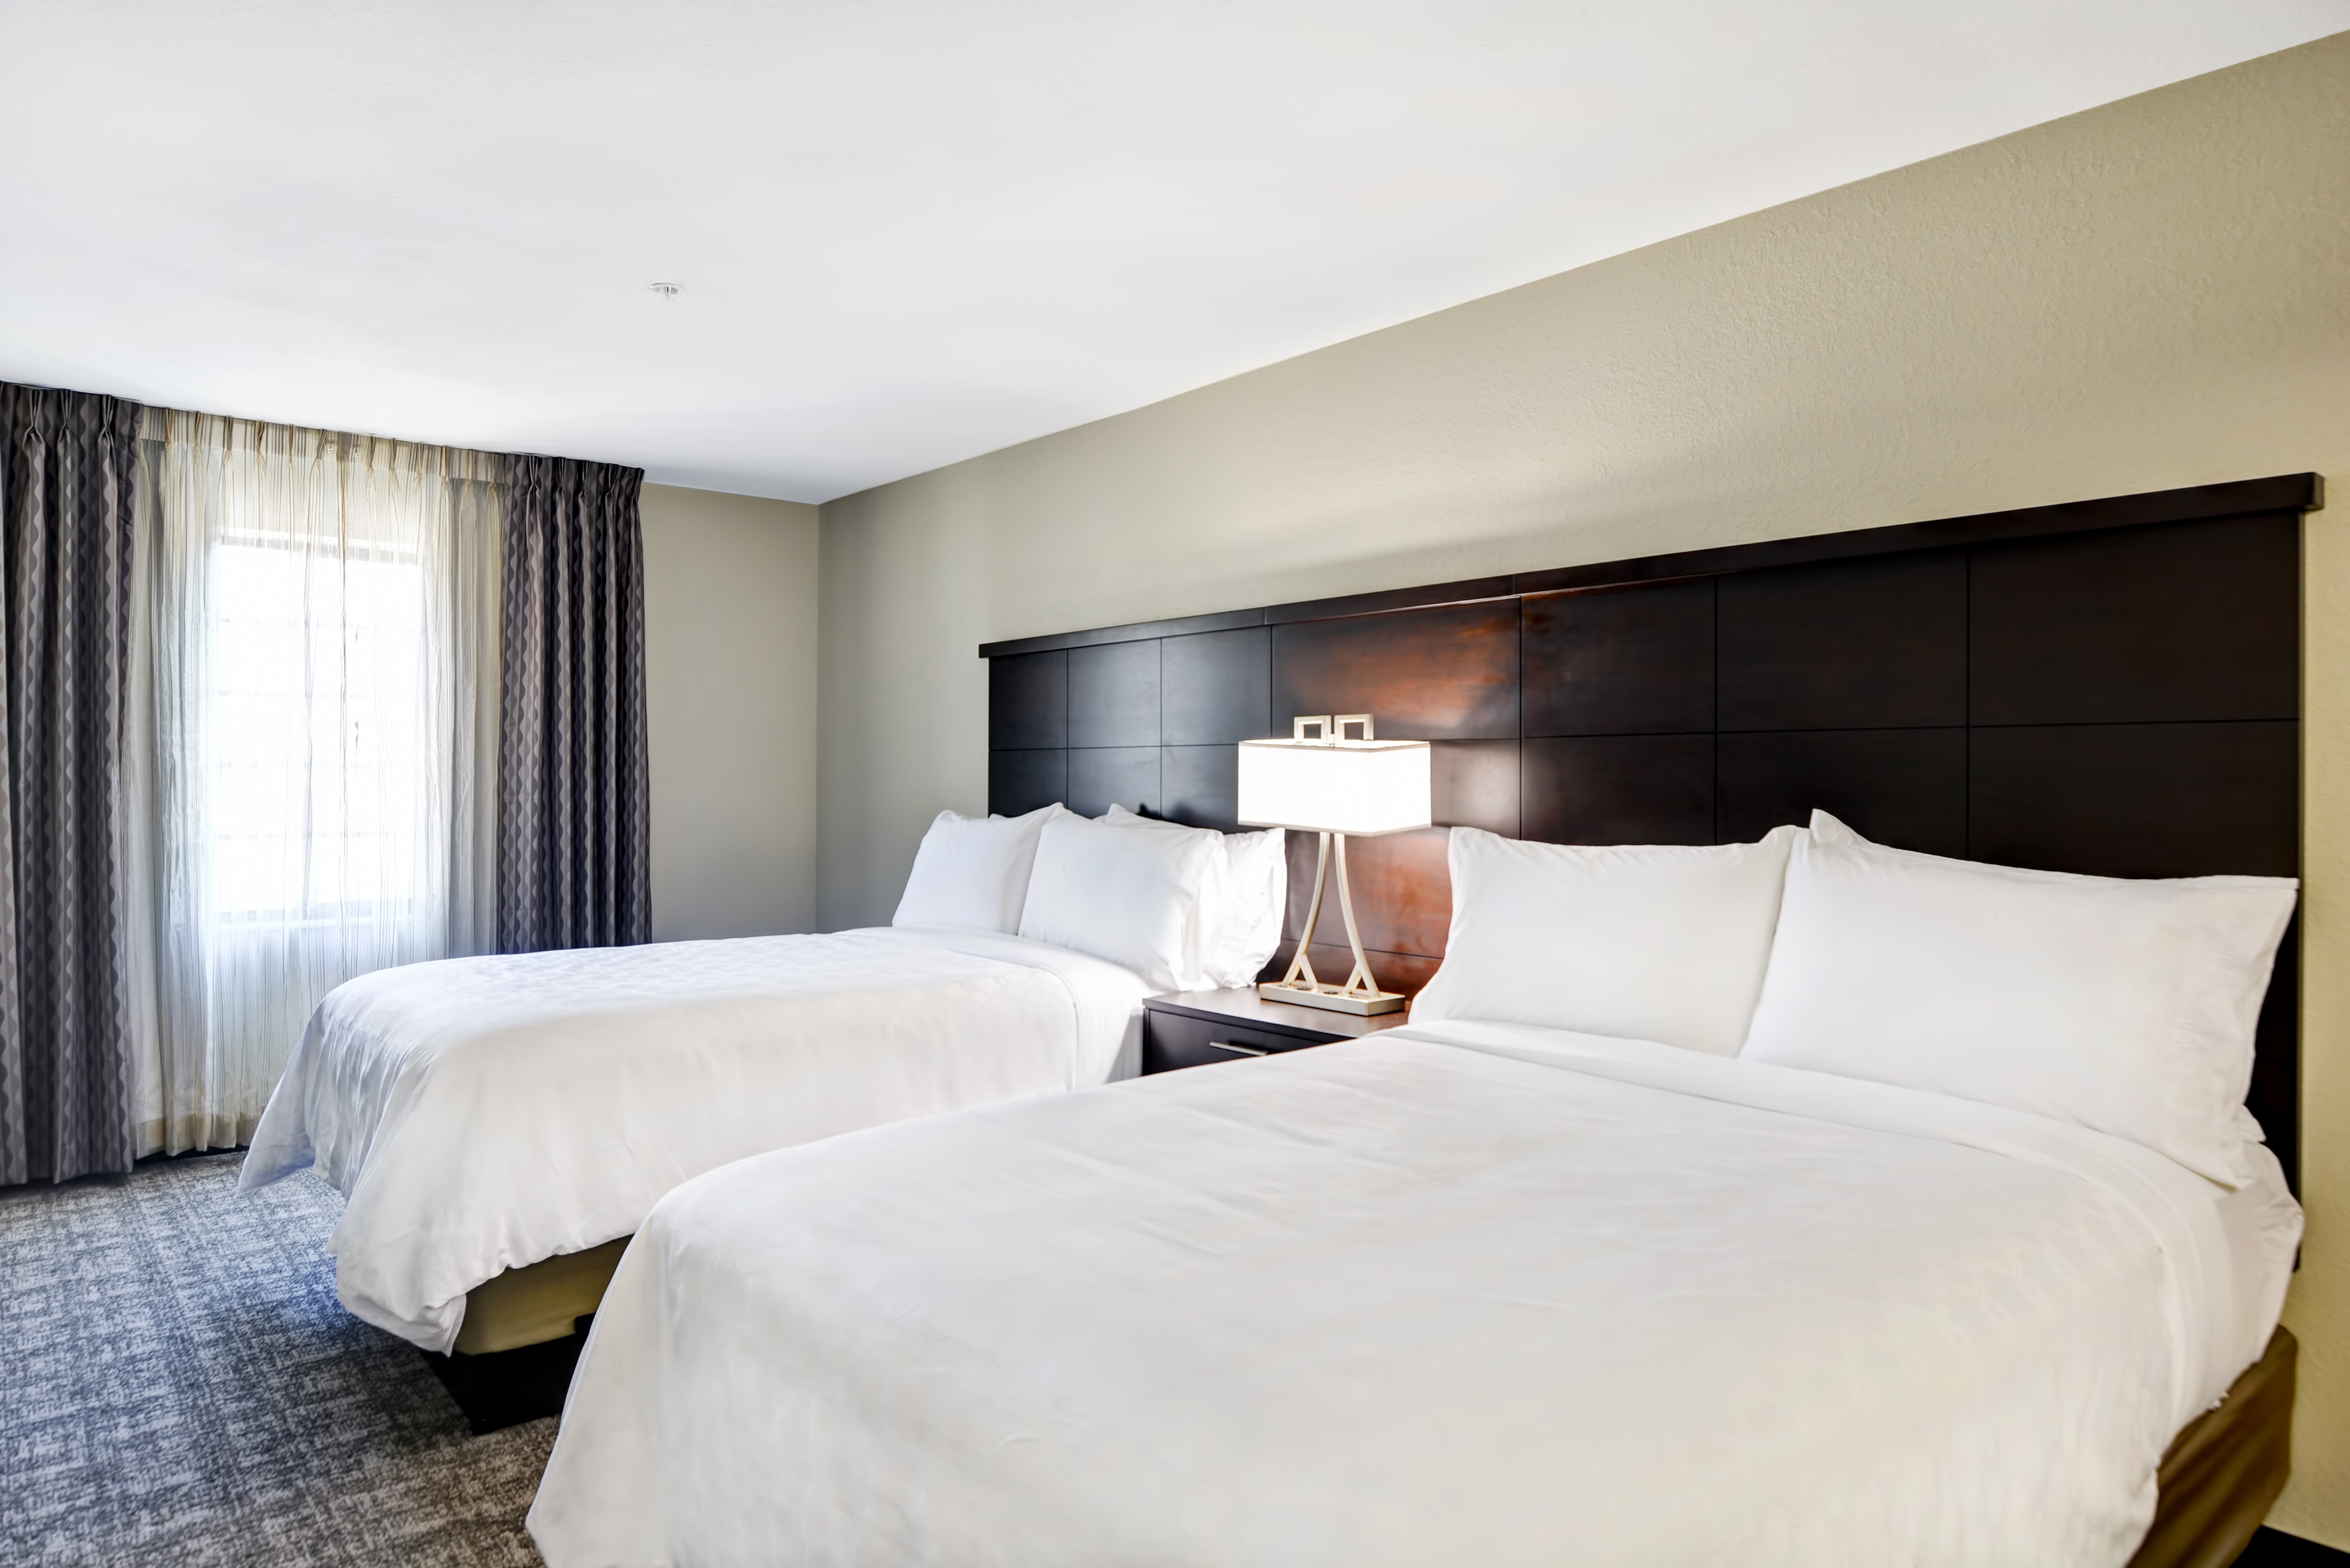 Choose between rooms with two beds or one king standard.